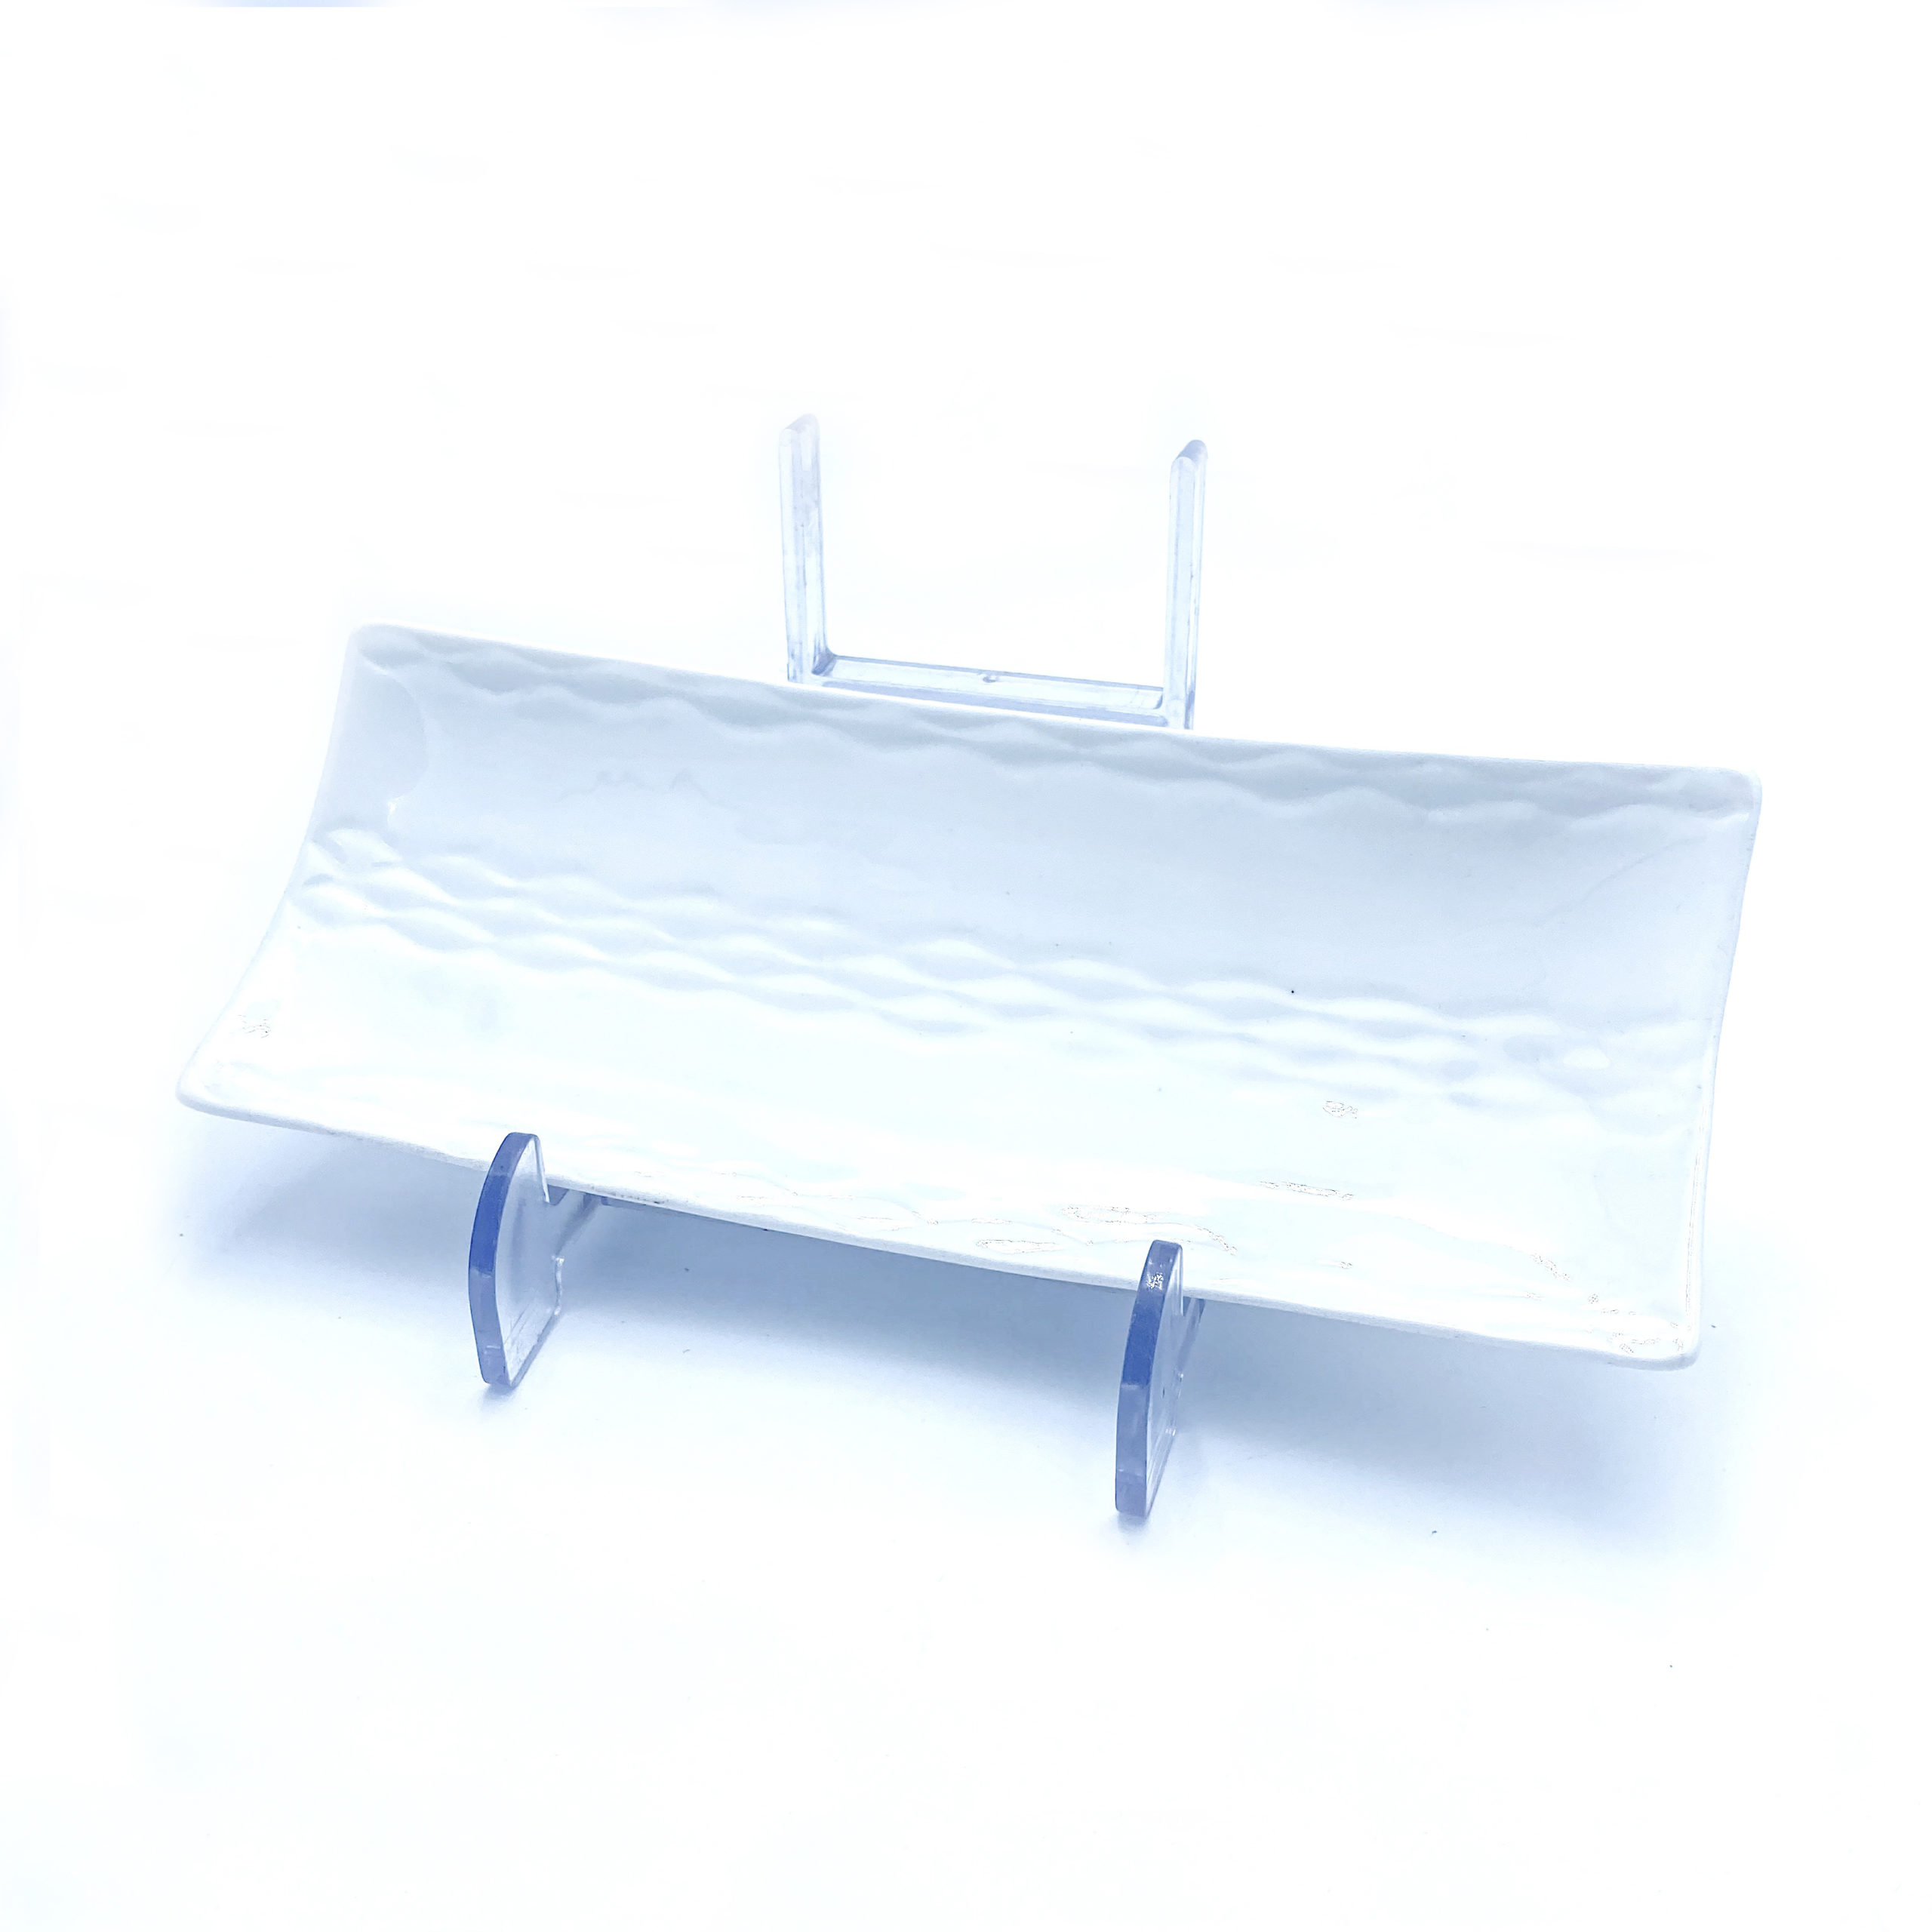 White Porcelain Rectangular Plate, Curved Corners